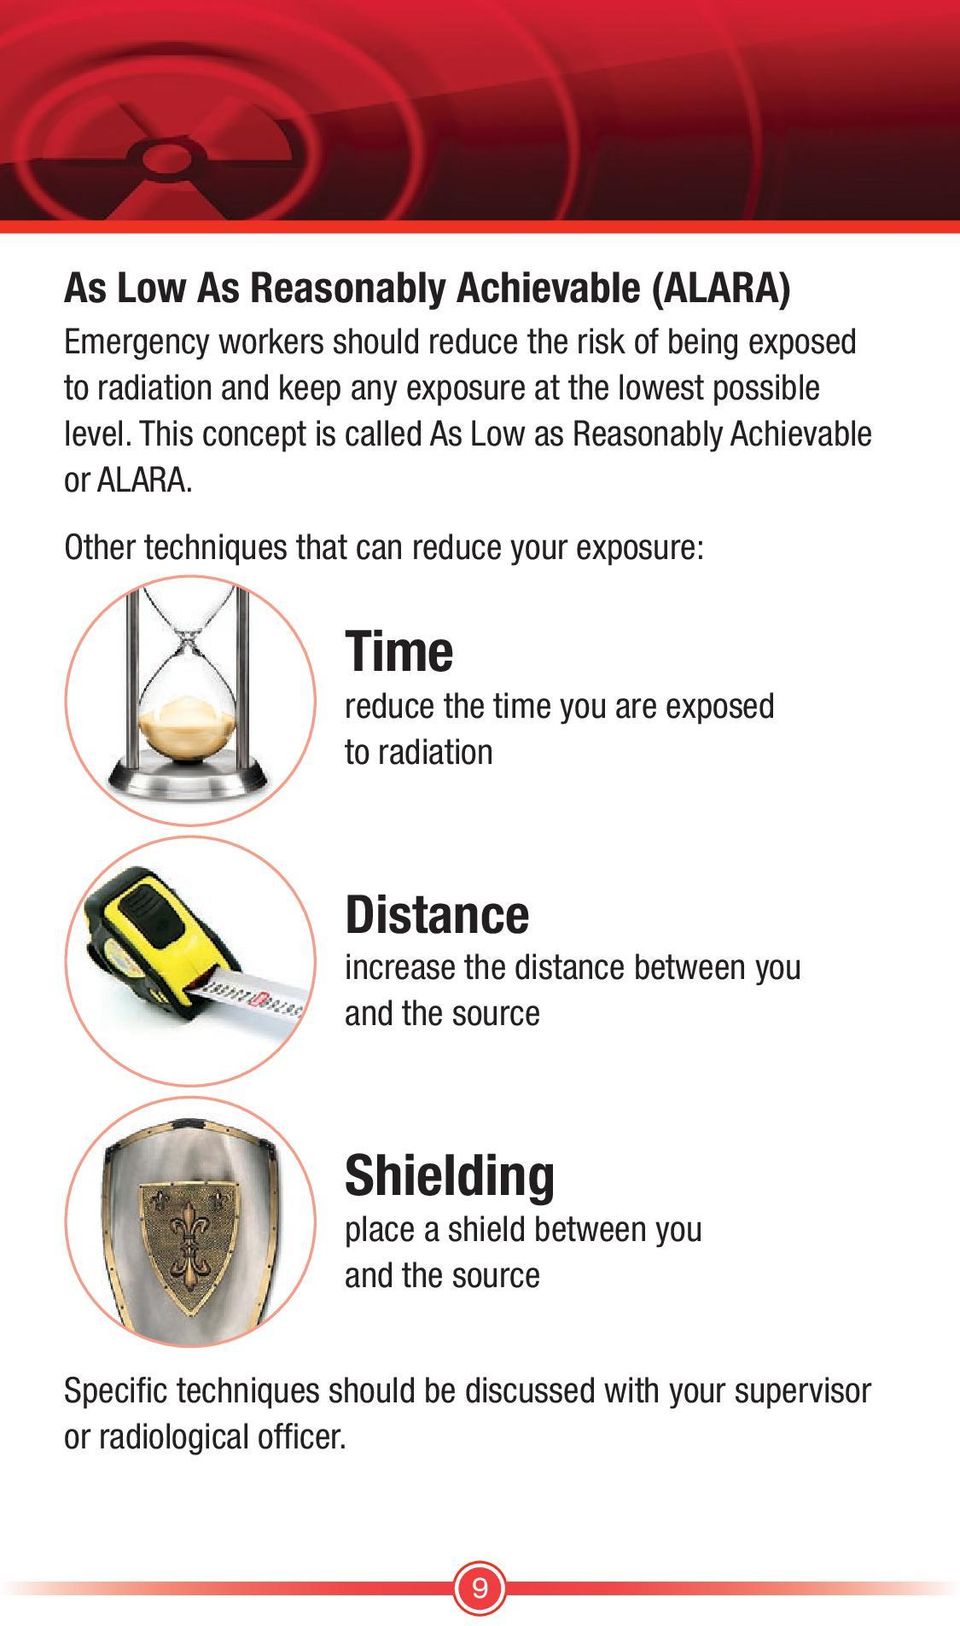 Other techniques that can reduce your exposure: Time reduce the time you are exposed to radiation Distance increase the distance